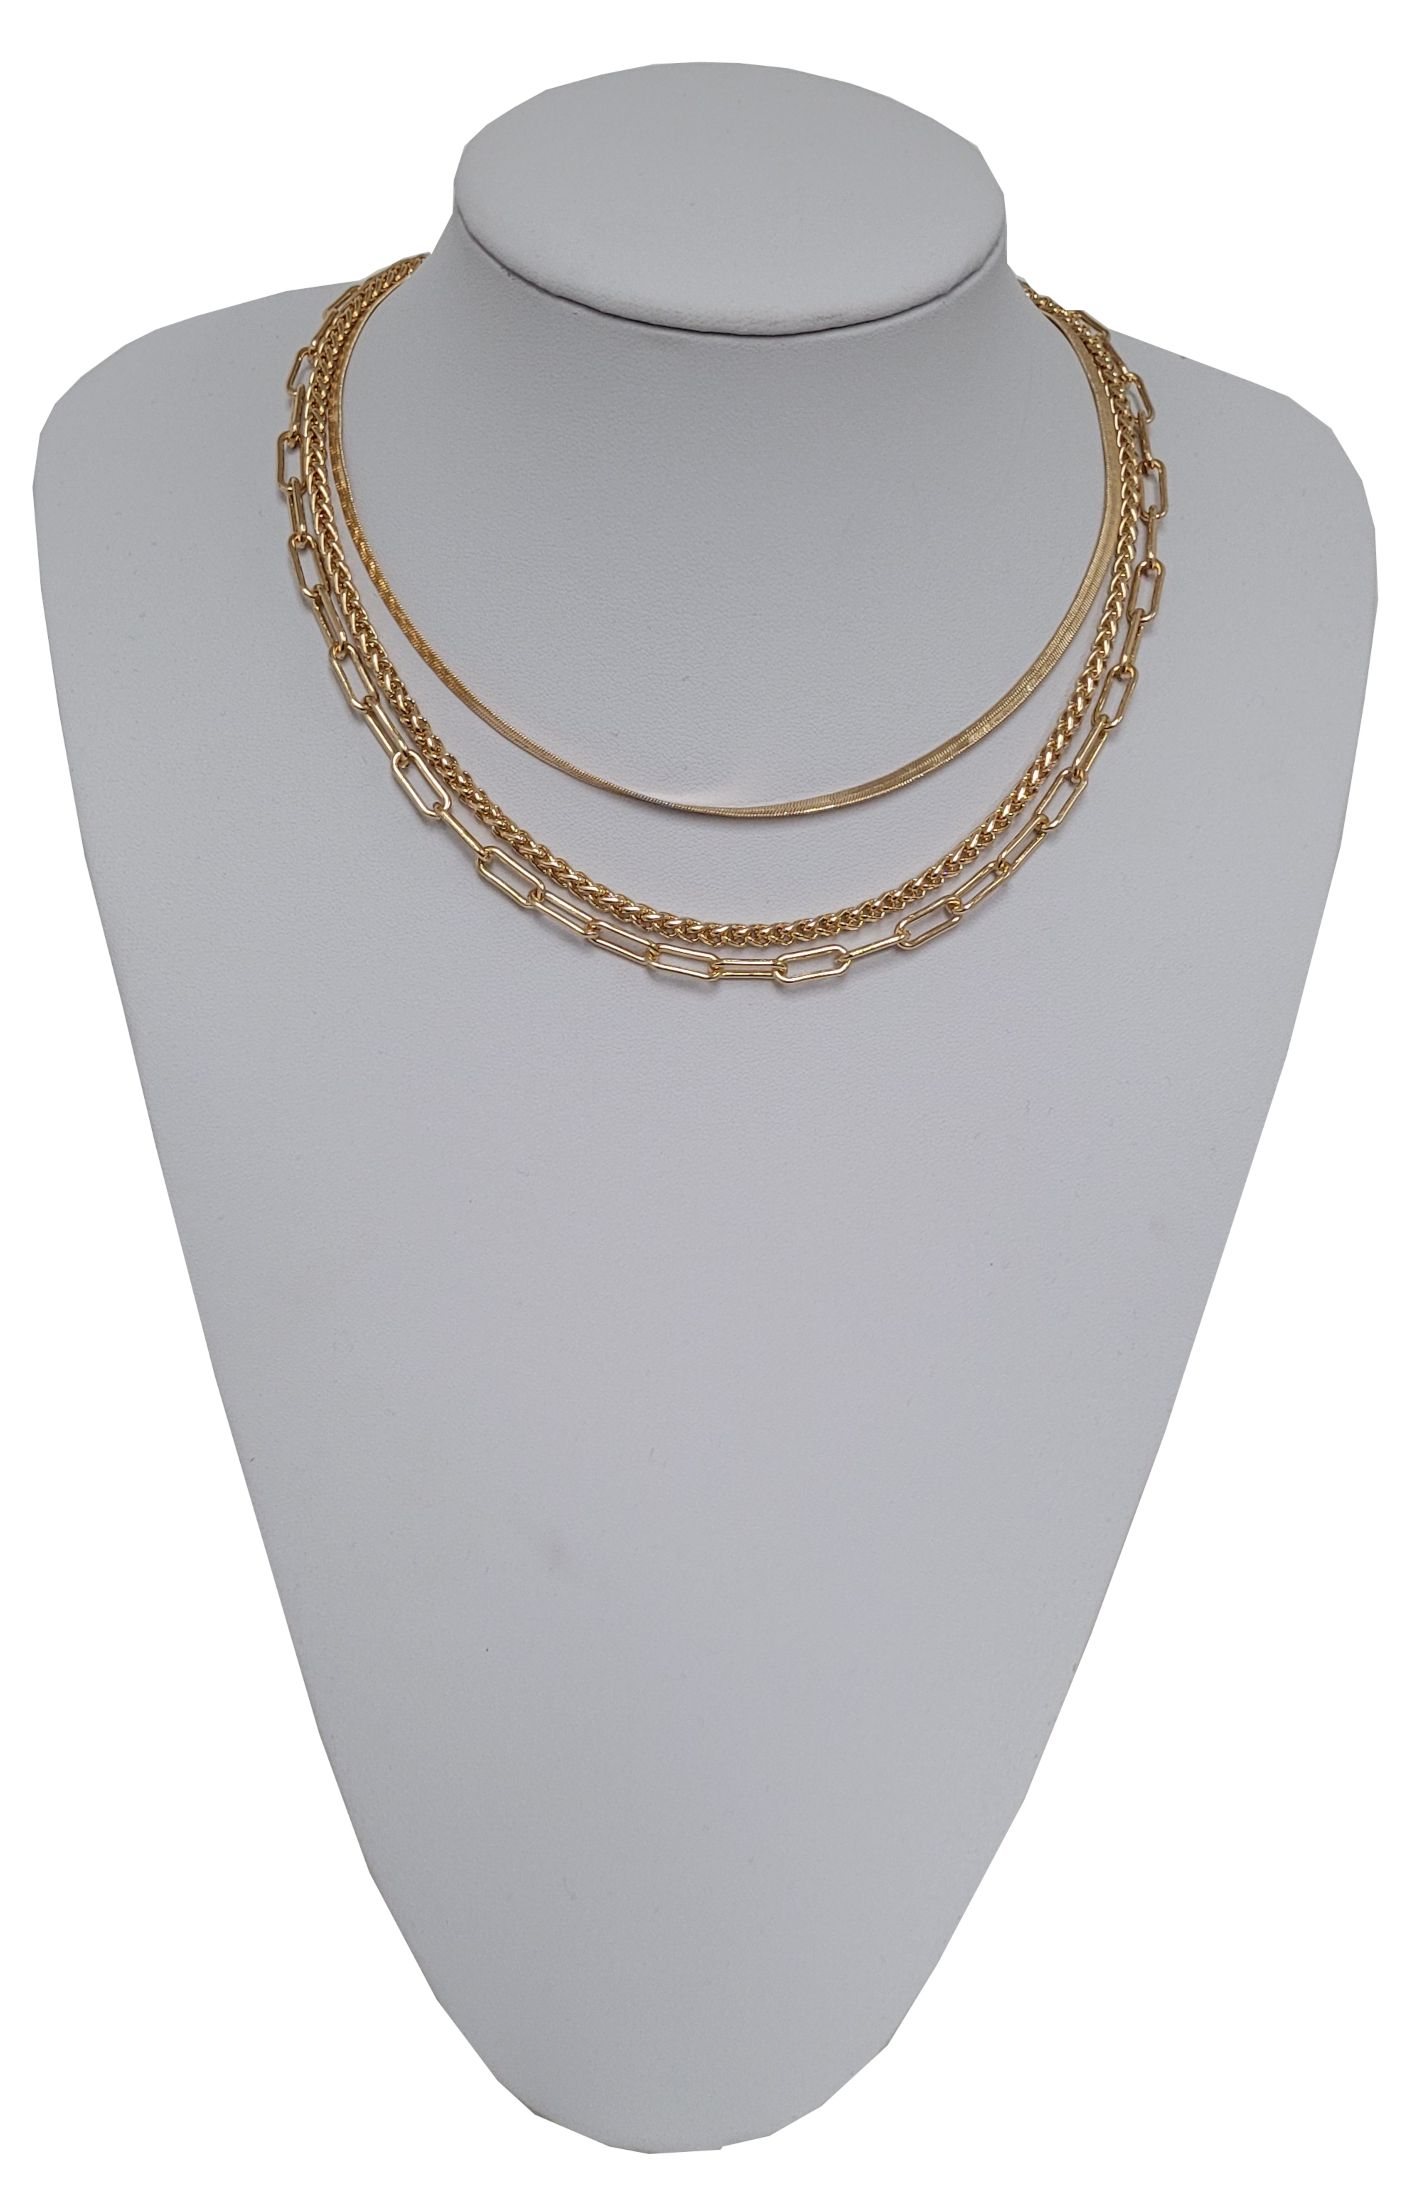 Time and Tru Women's Gold Tone Layering Chain Necklace. | Walmart (US)